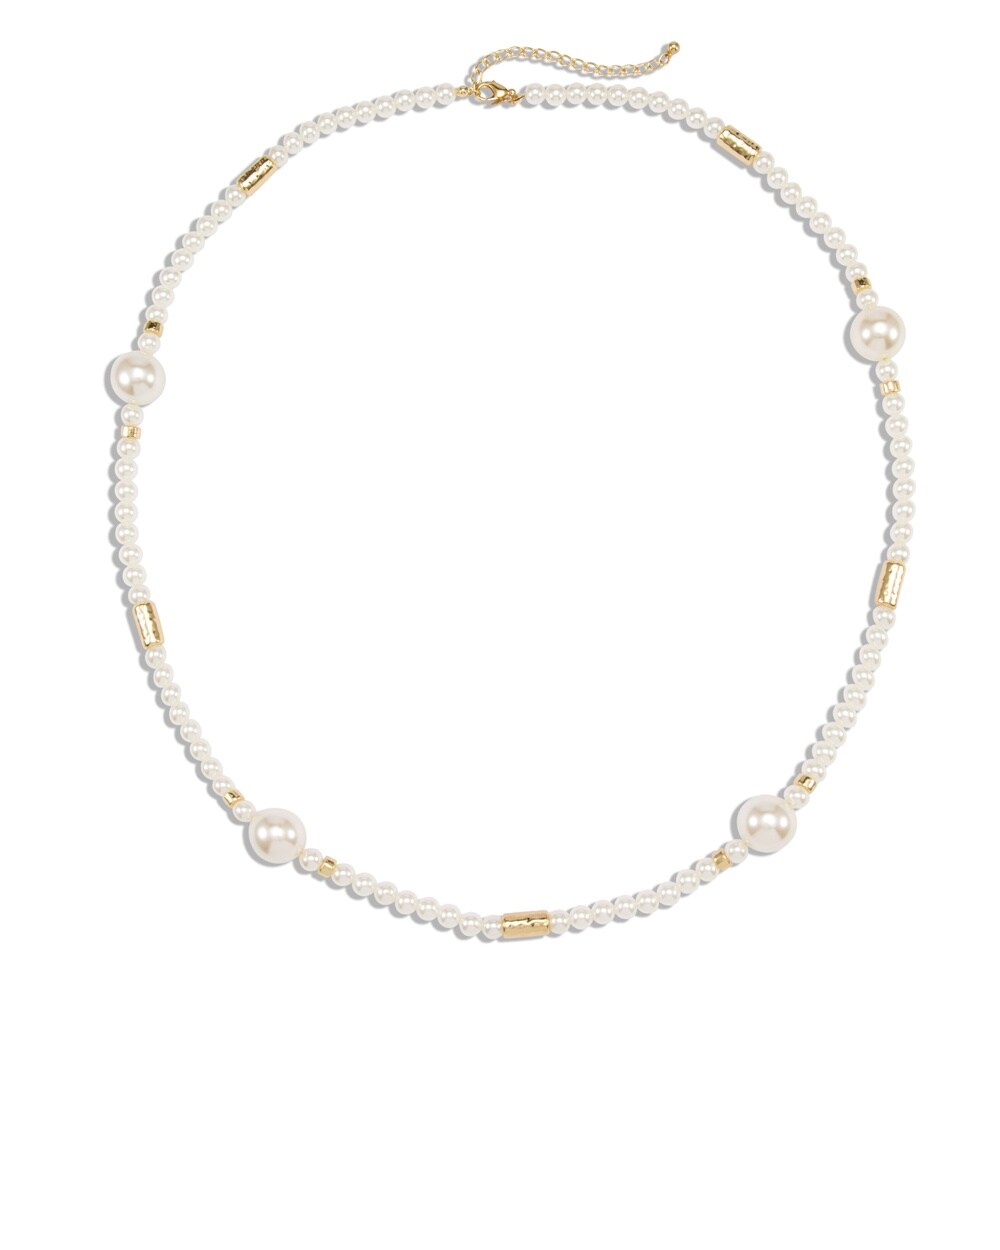 Aster Simulated Pearl Necklace